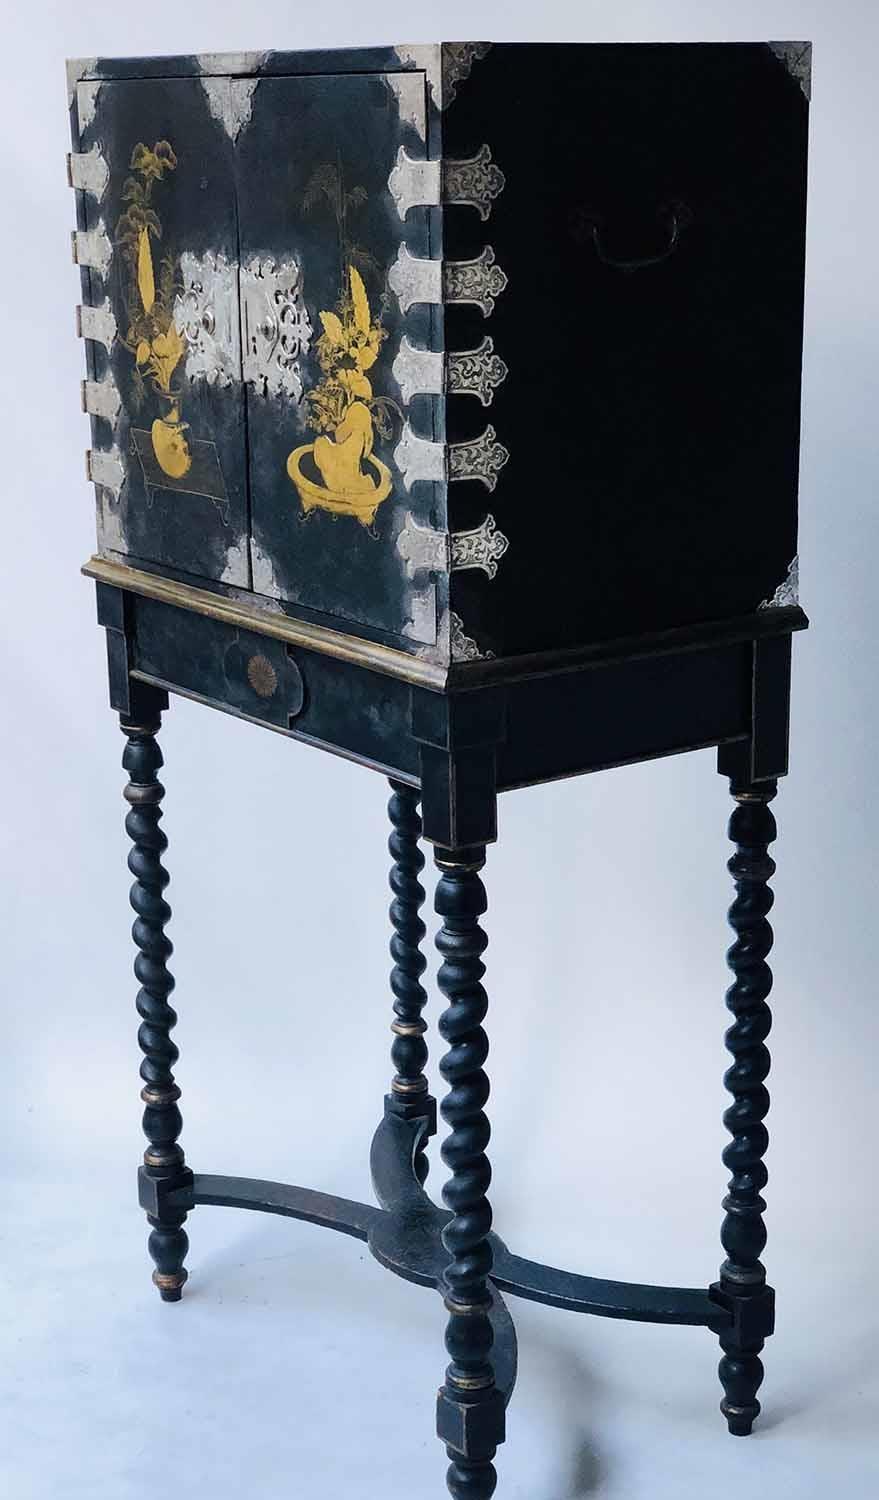 CABINET ON STAND, 18th century Chinese export decorated gilt and black lacquer with two doors - Image 6 of 6